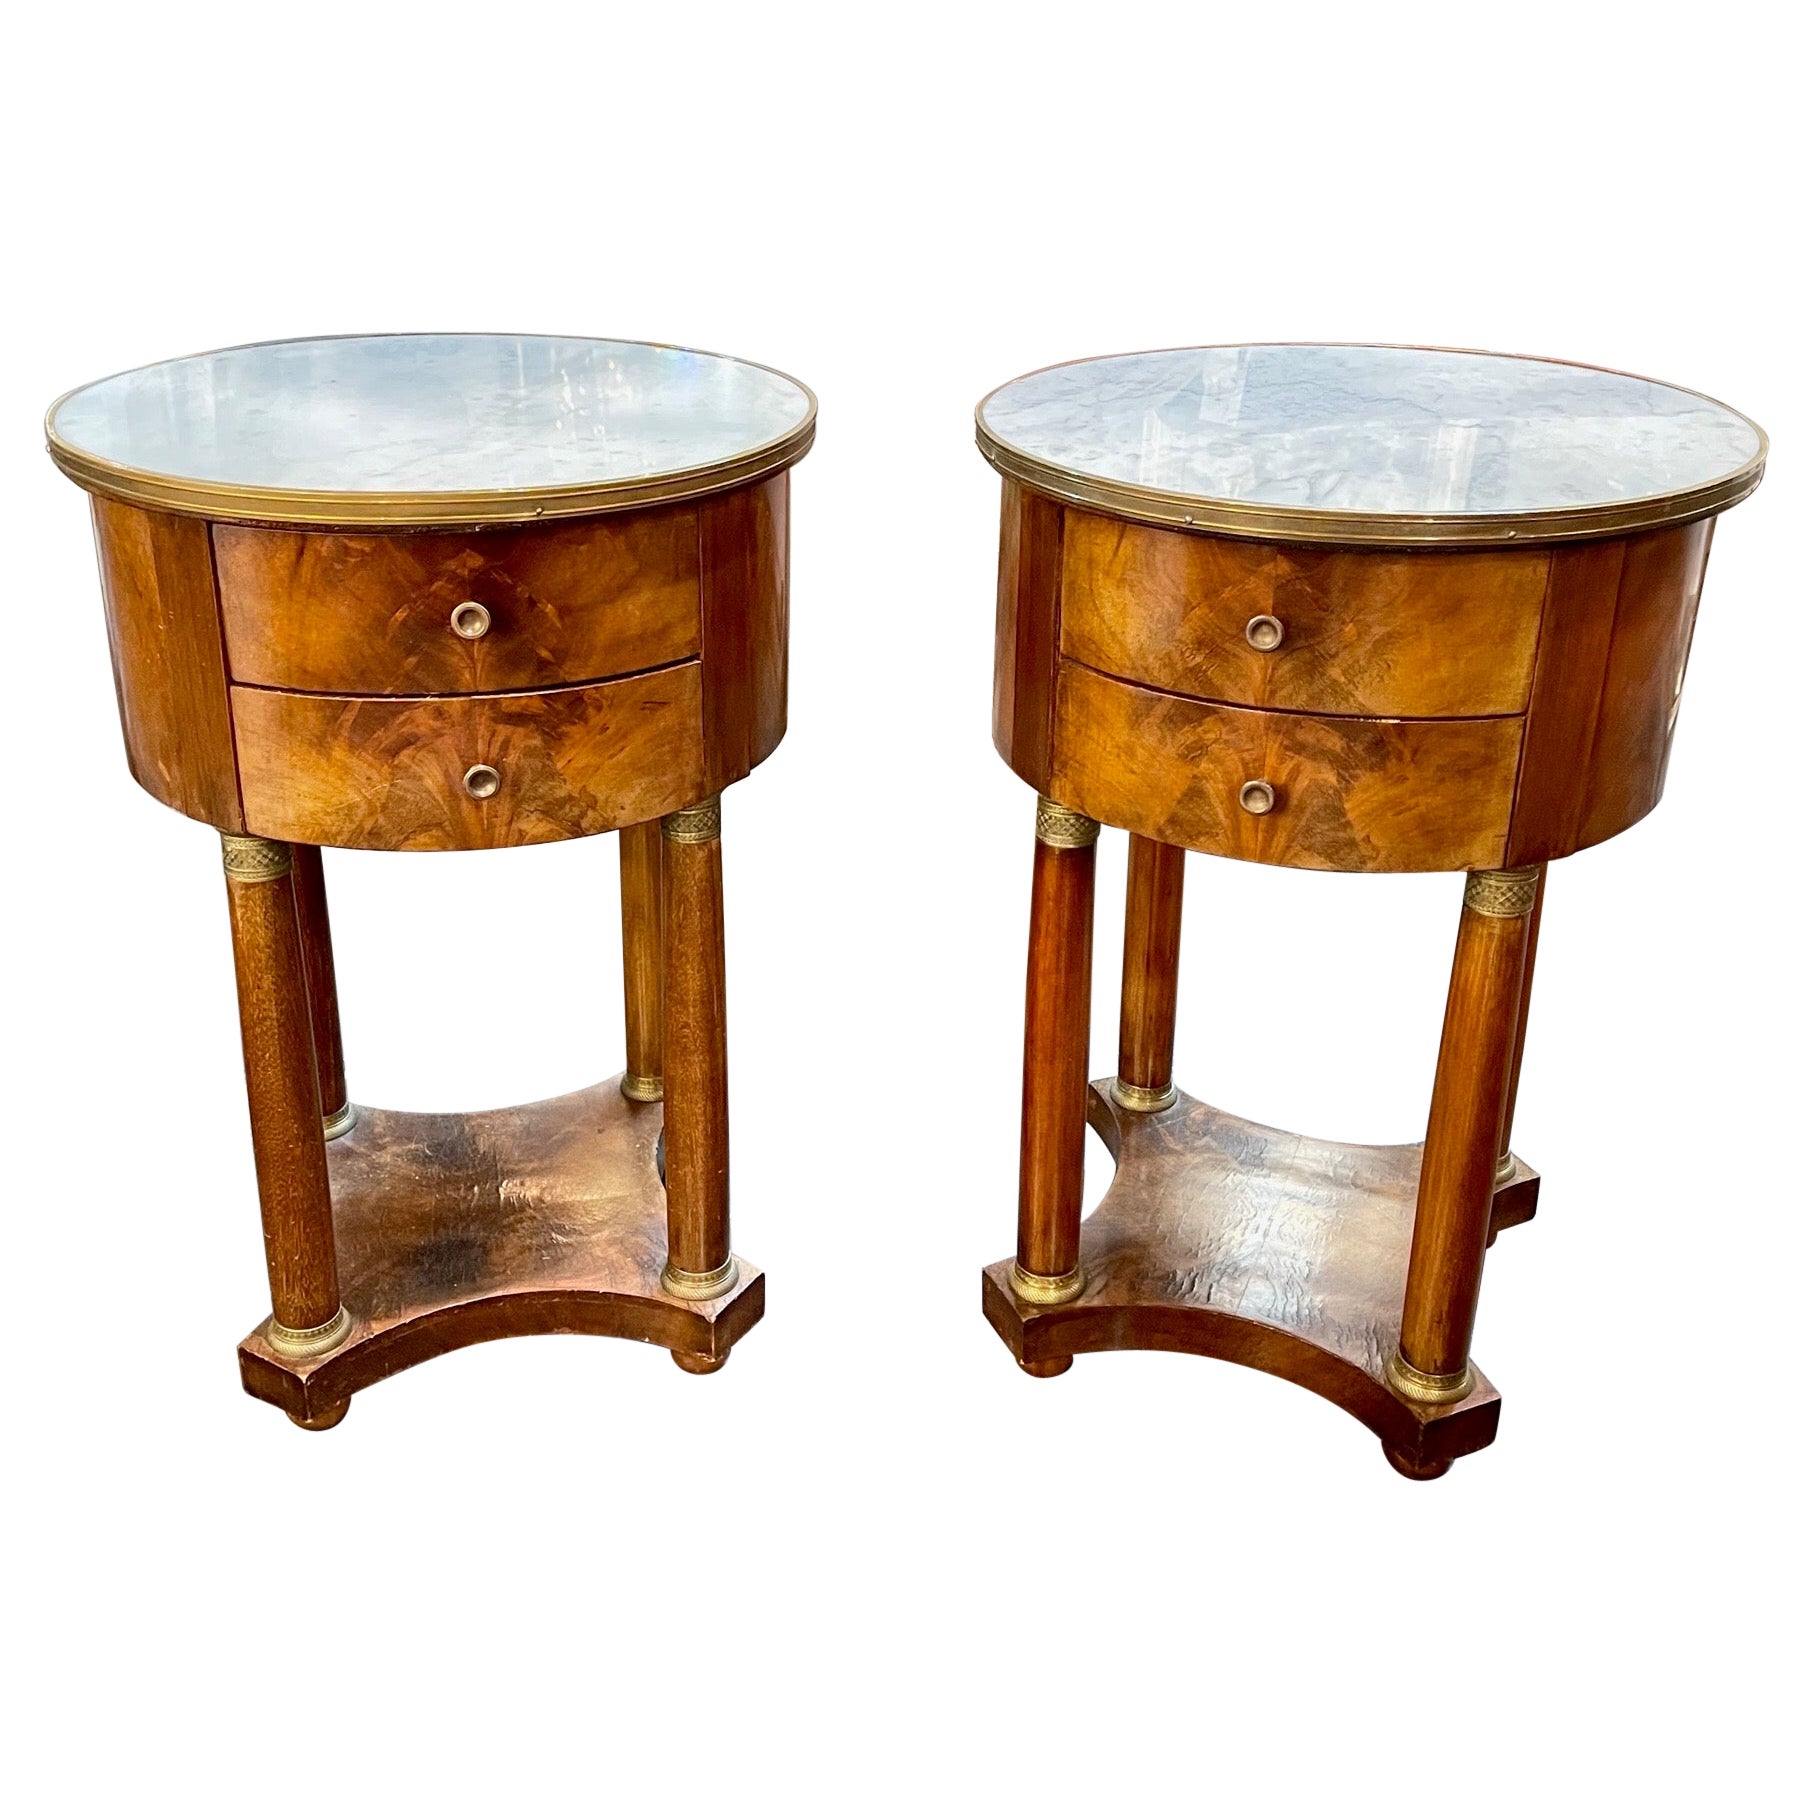 19th Century French Empire Mahogany Side Tables with Marble Tops